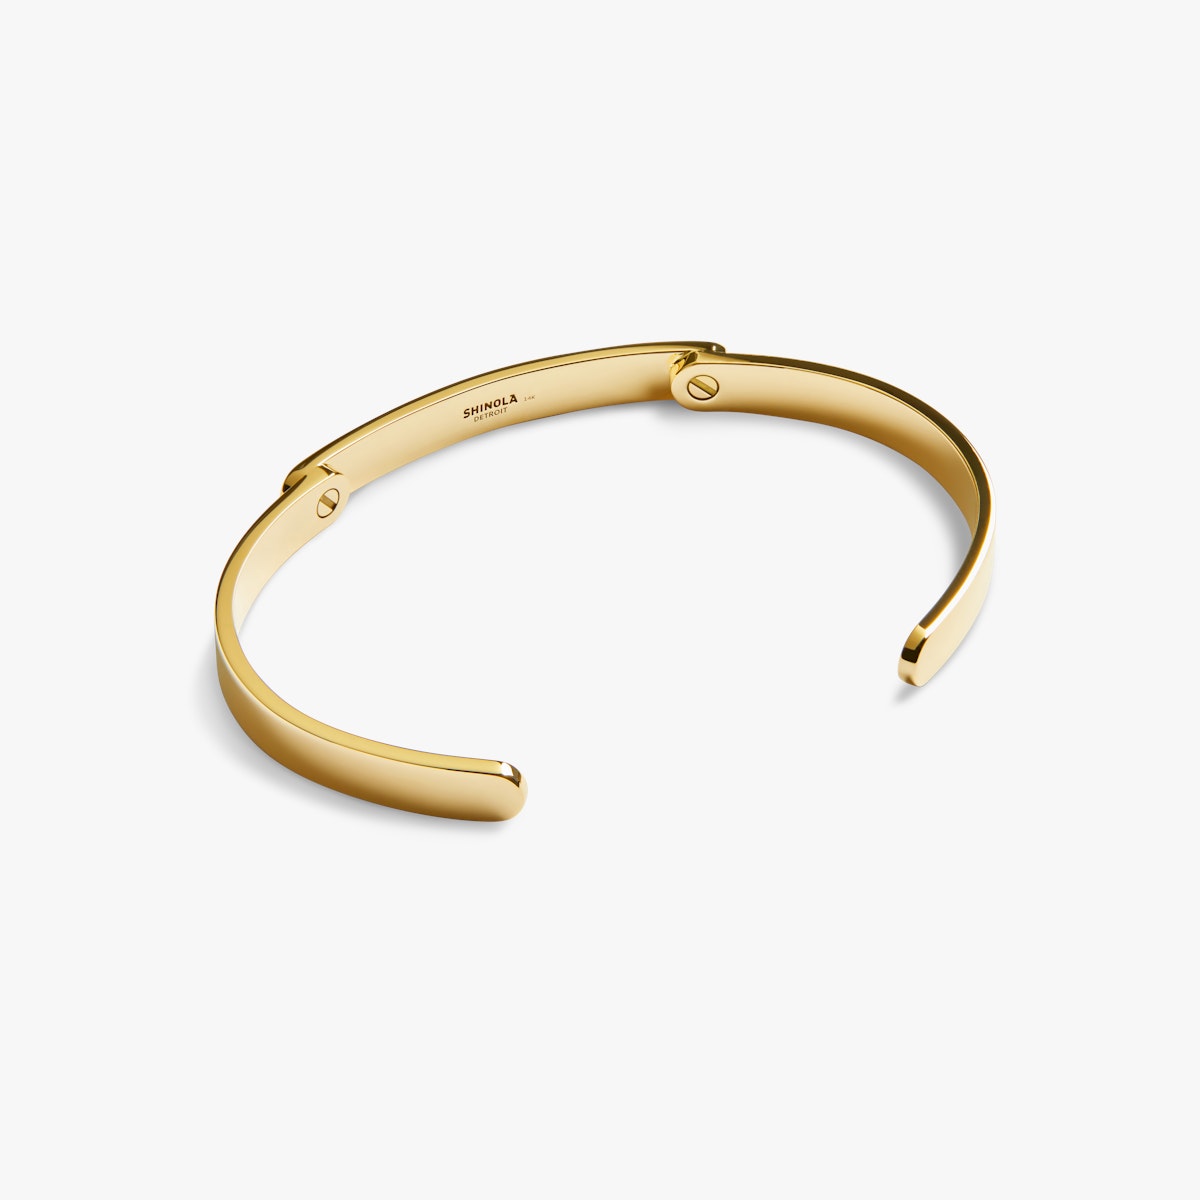 Nano Victoire 14 Kt Gold Arm Cuff With Diamonds in Gold - Rainbow